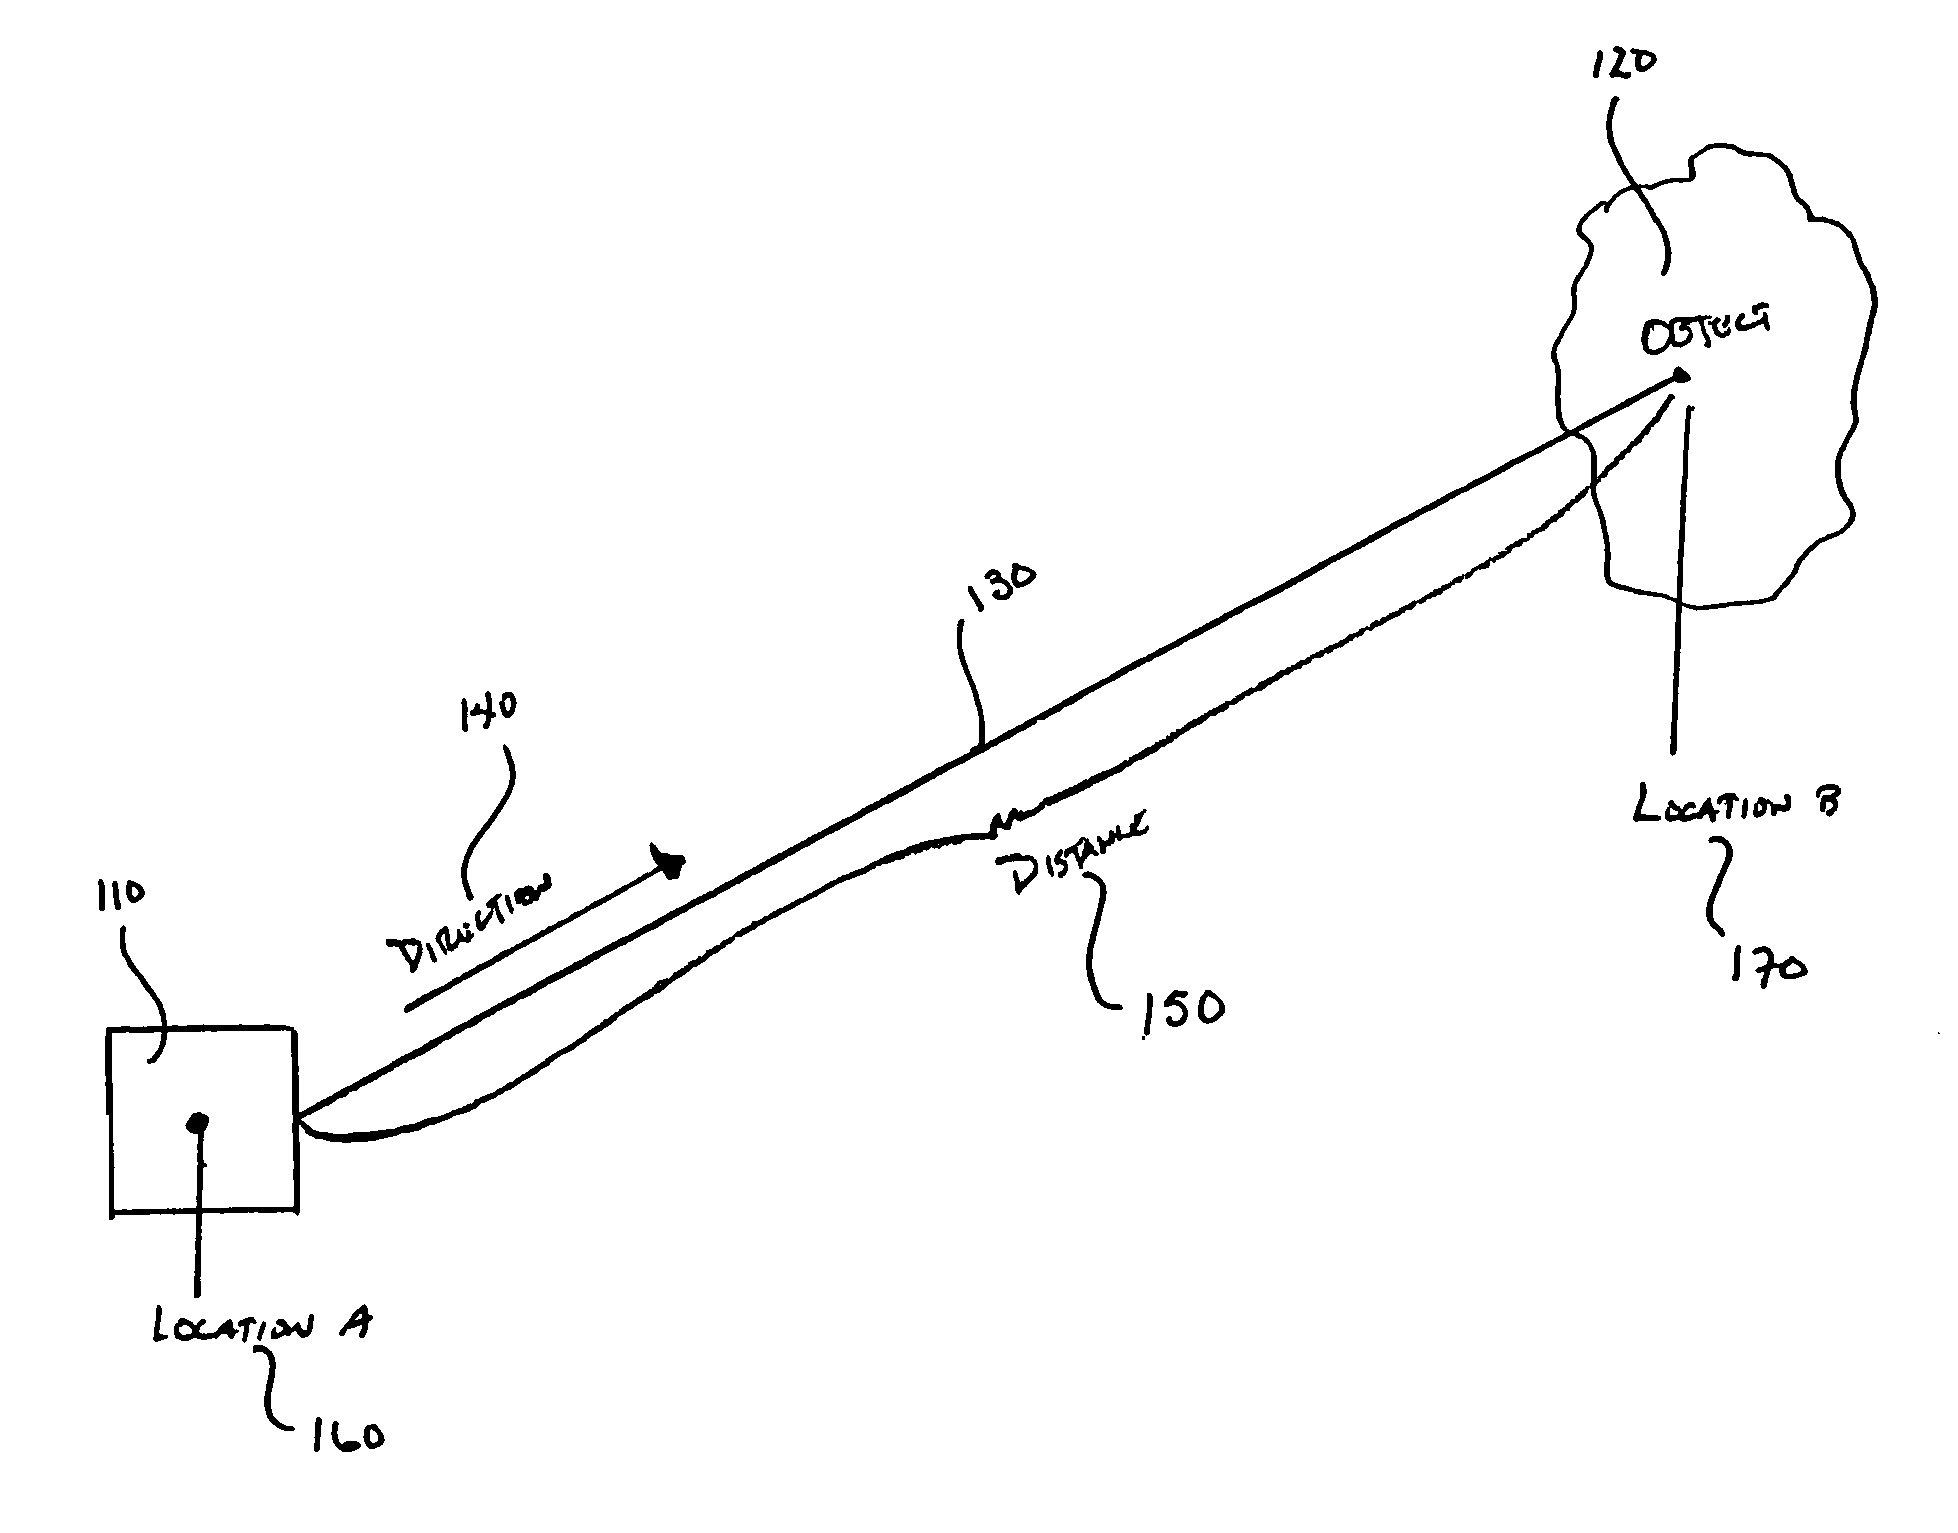 Systems and methods for location based image telegraphy